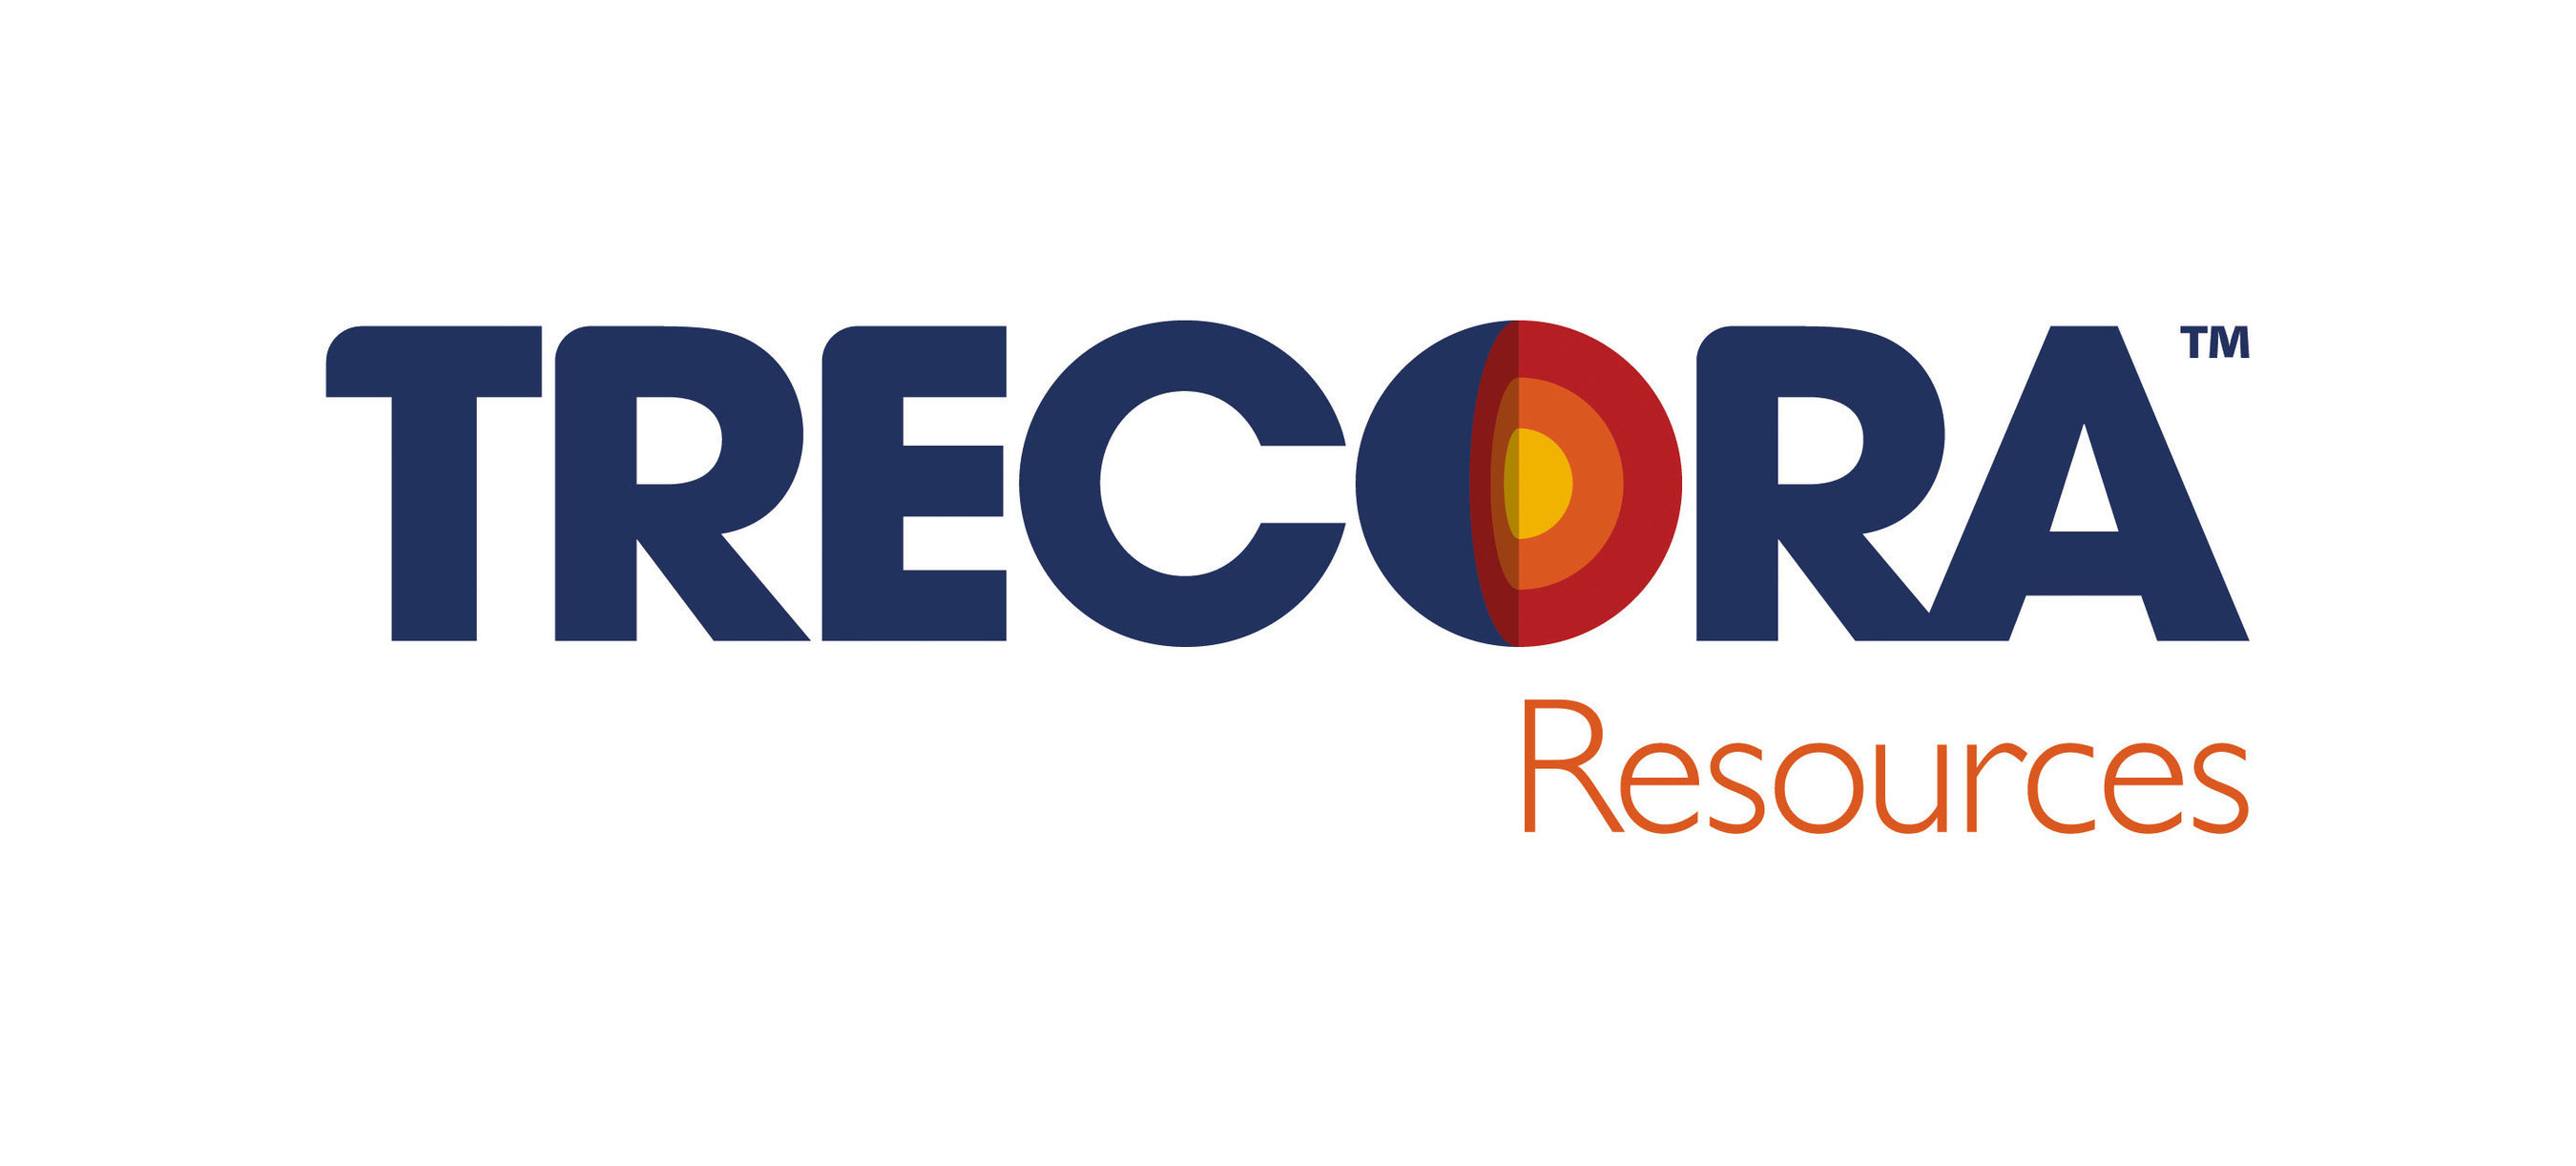 Trecora Resources (TREC) owns and operates a petrochemical facility located in southeast Texas, just north of Beaumont, which specializes in high purity petrochemical solvents and other solvent type manufacturing. TREC also owns and operates a leading manufacturer of specialty polyethylene waxes and provider of custom processing services located in the heart of the Petrochemical complex in Pasadena, Texas. In addition, the Company is the original developer and a 35% owner of Al Masane Al Kobra Mining Co...